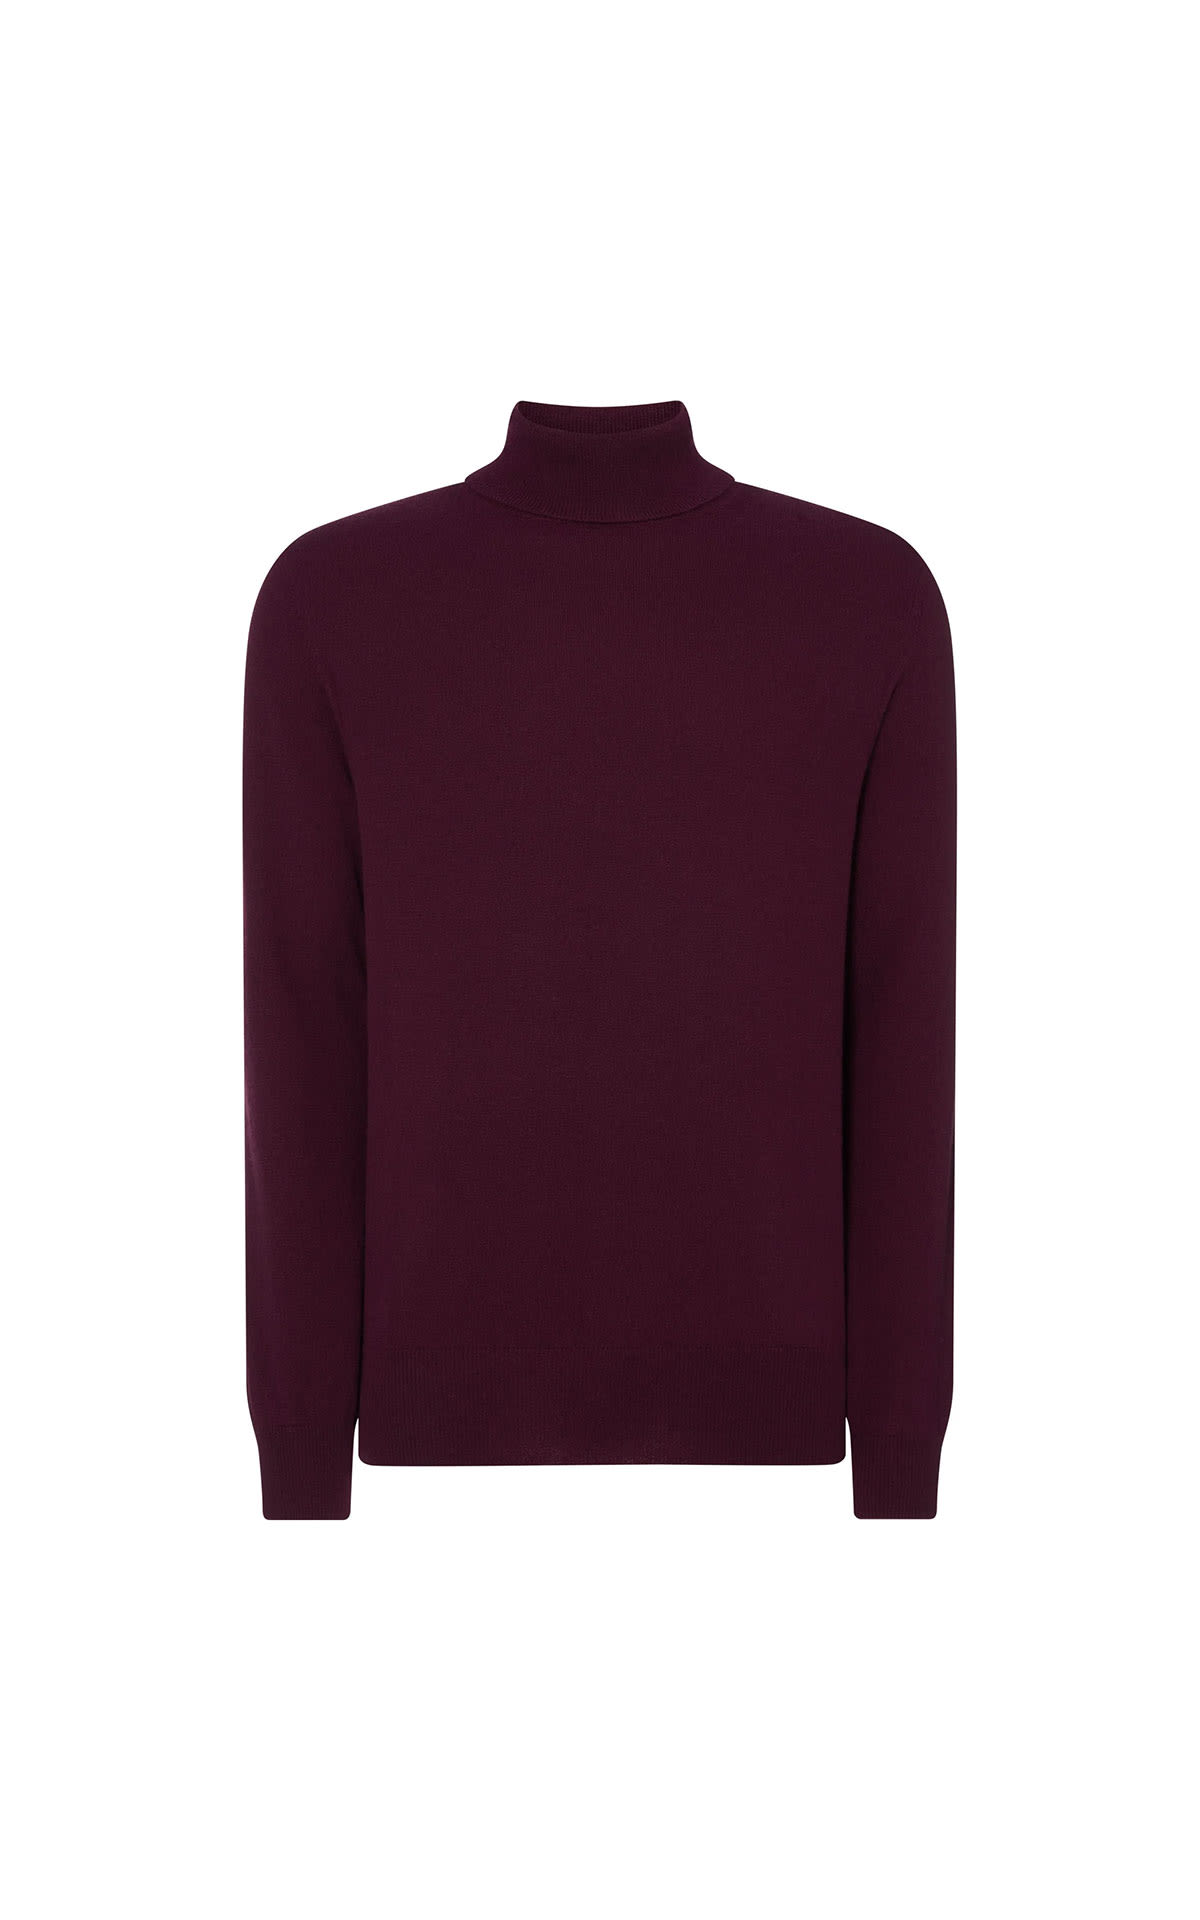 N. Peal The Trafalgar polo neck cashmere jumper from Bicester Village